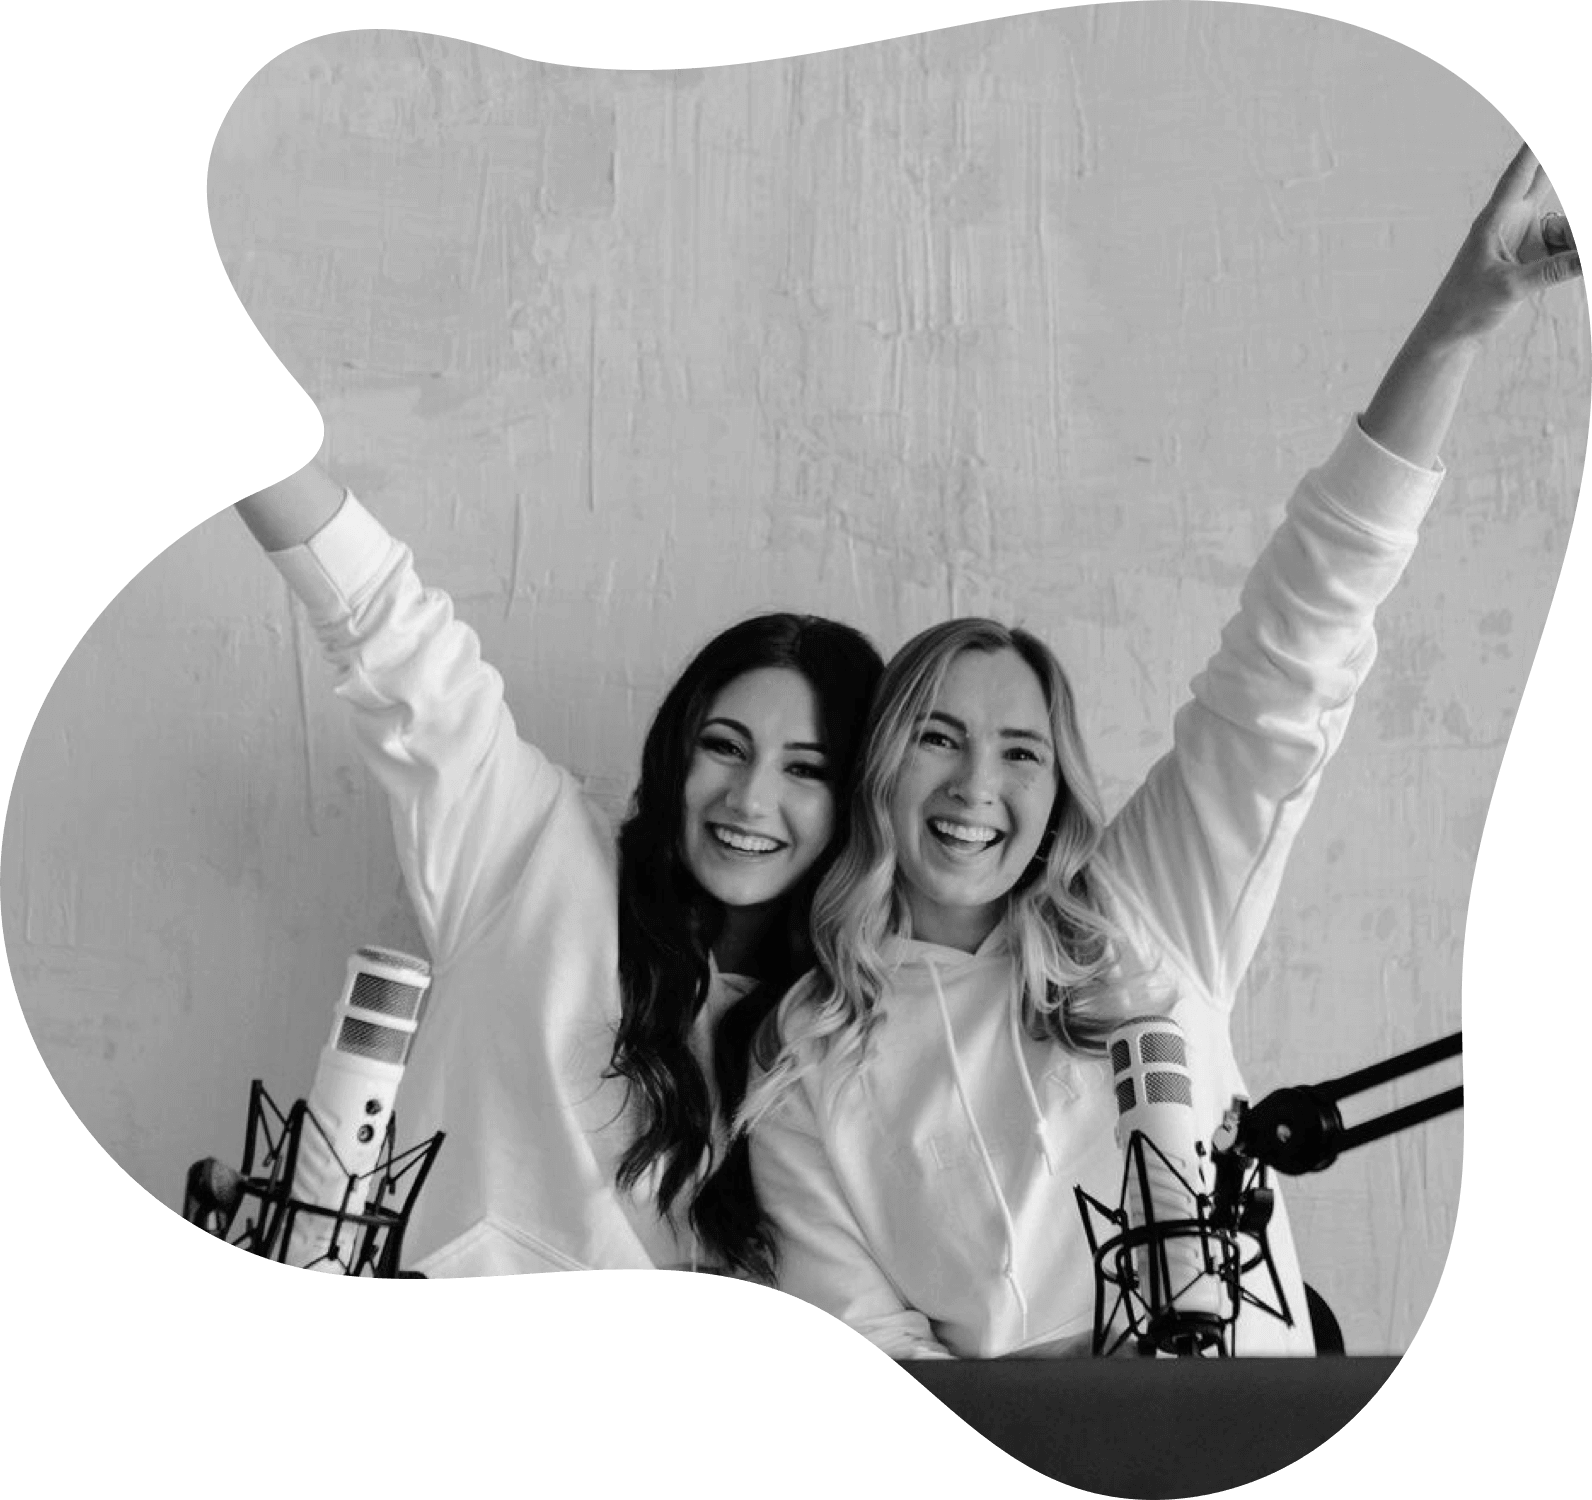 Podcast Service - Girls cheering with their hands in the air